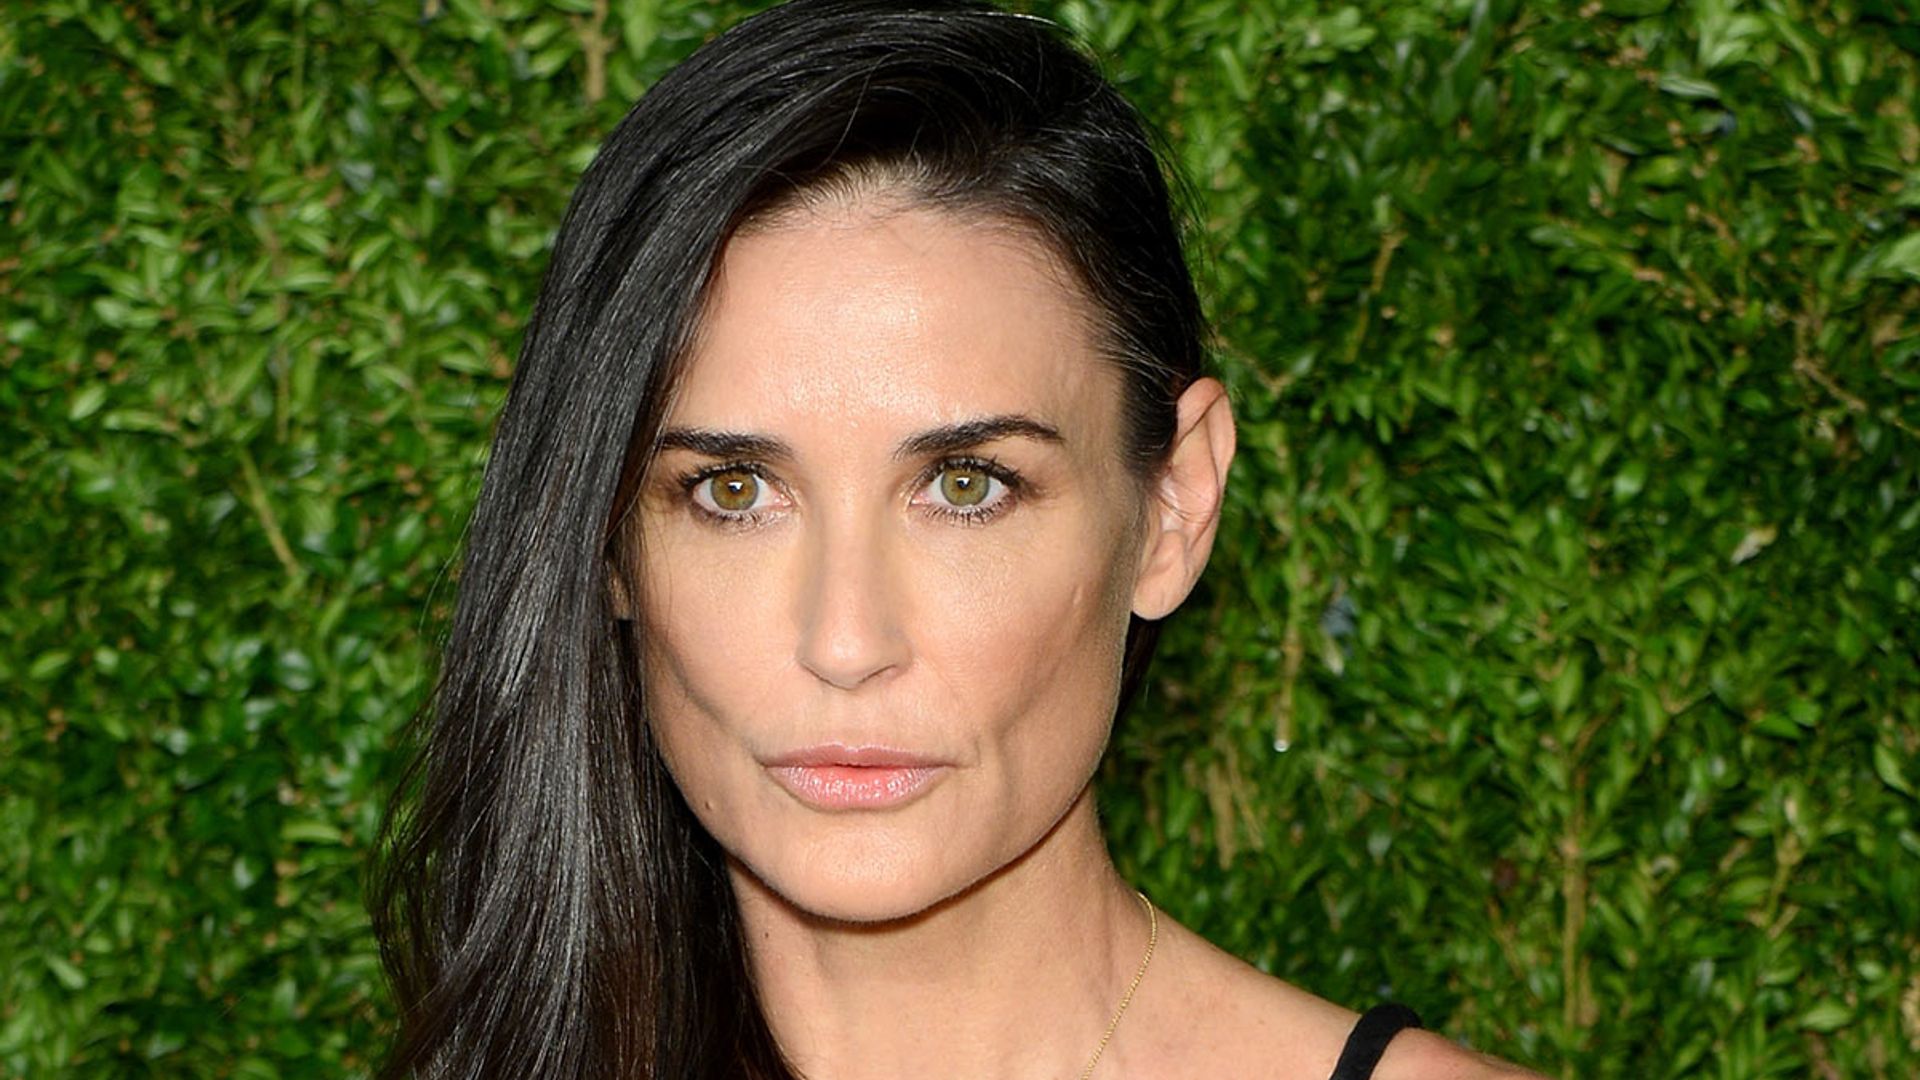 Demi Moore poses nude against husband's wishes